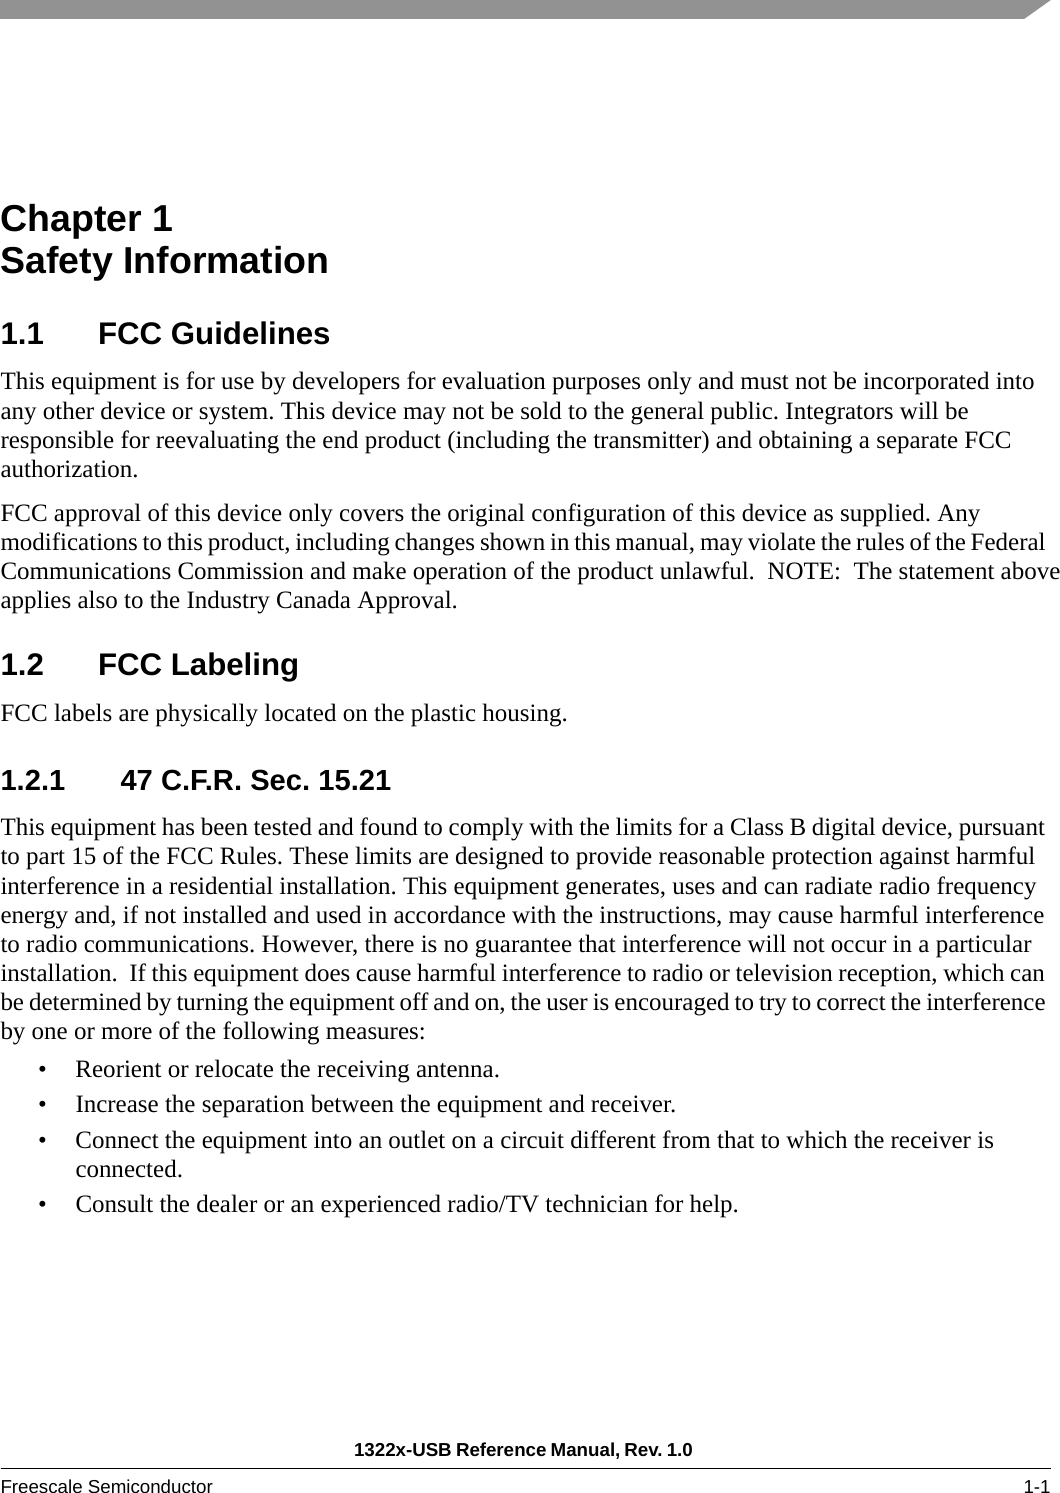 1322x-USB Reference Manual, Rev. 1.0 Freescale Semiconductor 1-1Chapter 1  Safety Information1.1 FCC GuidelinesThis equipment is for use by developers for evaluation purposes only and must not be incorporated into any other device or system. This device may not be sold to the general public. Integrators will be responsible for reevaluating the end product (including the transmitter) and obtaining a separate FCC authorization.FCC approval of this device only covers the original configuration of this device as supplied. Any modifications to this product, including changes shown in this manual, may violate the rules of the Federal Communications Commission and make operation of the product unlawful.  NOTE:  The statement aboveapplies also to the Industry Canada Approval. 1.2 FCC LabelingFCC labels are physically located on the plastic housing.1.2.1 47 C.F.R. Sec. 15.21This equipment has been tested and found to comply with the limits for a Class B digital device, pursuant to part 15 of the FCC Rules. These limits are designed to provide reasonable protection against harmful interference in a residential installation. This equipment generates, uses and can radiate radio frequency energy and, if not installed and used in accordance with the instructions, may cause harmful interference to radio communications. However, there is no guarantee that interference will not occur in a particular installation.  If this equipment does cause harmful interference to radio or television reception, which can be determined by turning the equipment off and on, the user is encouraged to try to correct the interference by one or more of the following measures:• Reorient or relocate the receiving antenna.• Increase the separation between the equipment and receiver.• Connect the equipment into an outlet on a circuit different from that to which the receiver is connected.• Consult the dealer or an experienced radio/TV technician for help.